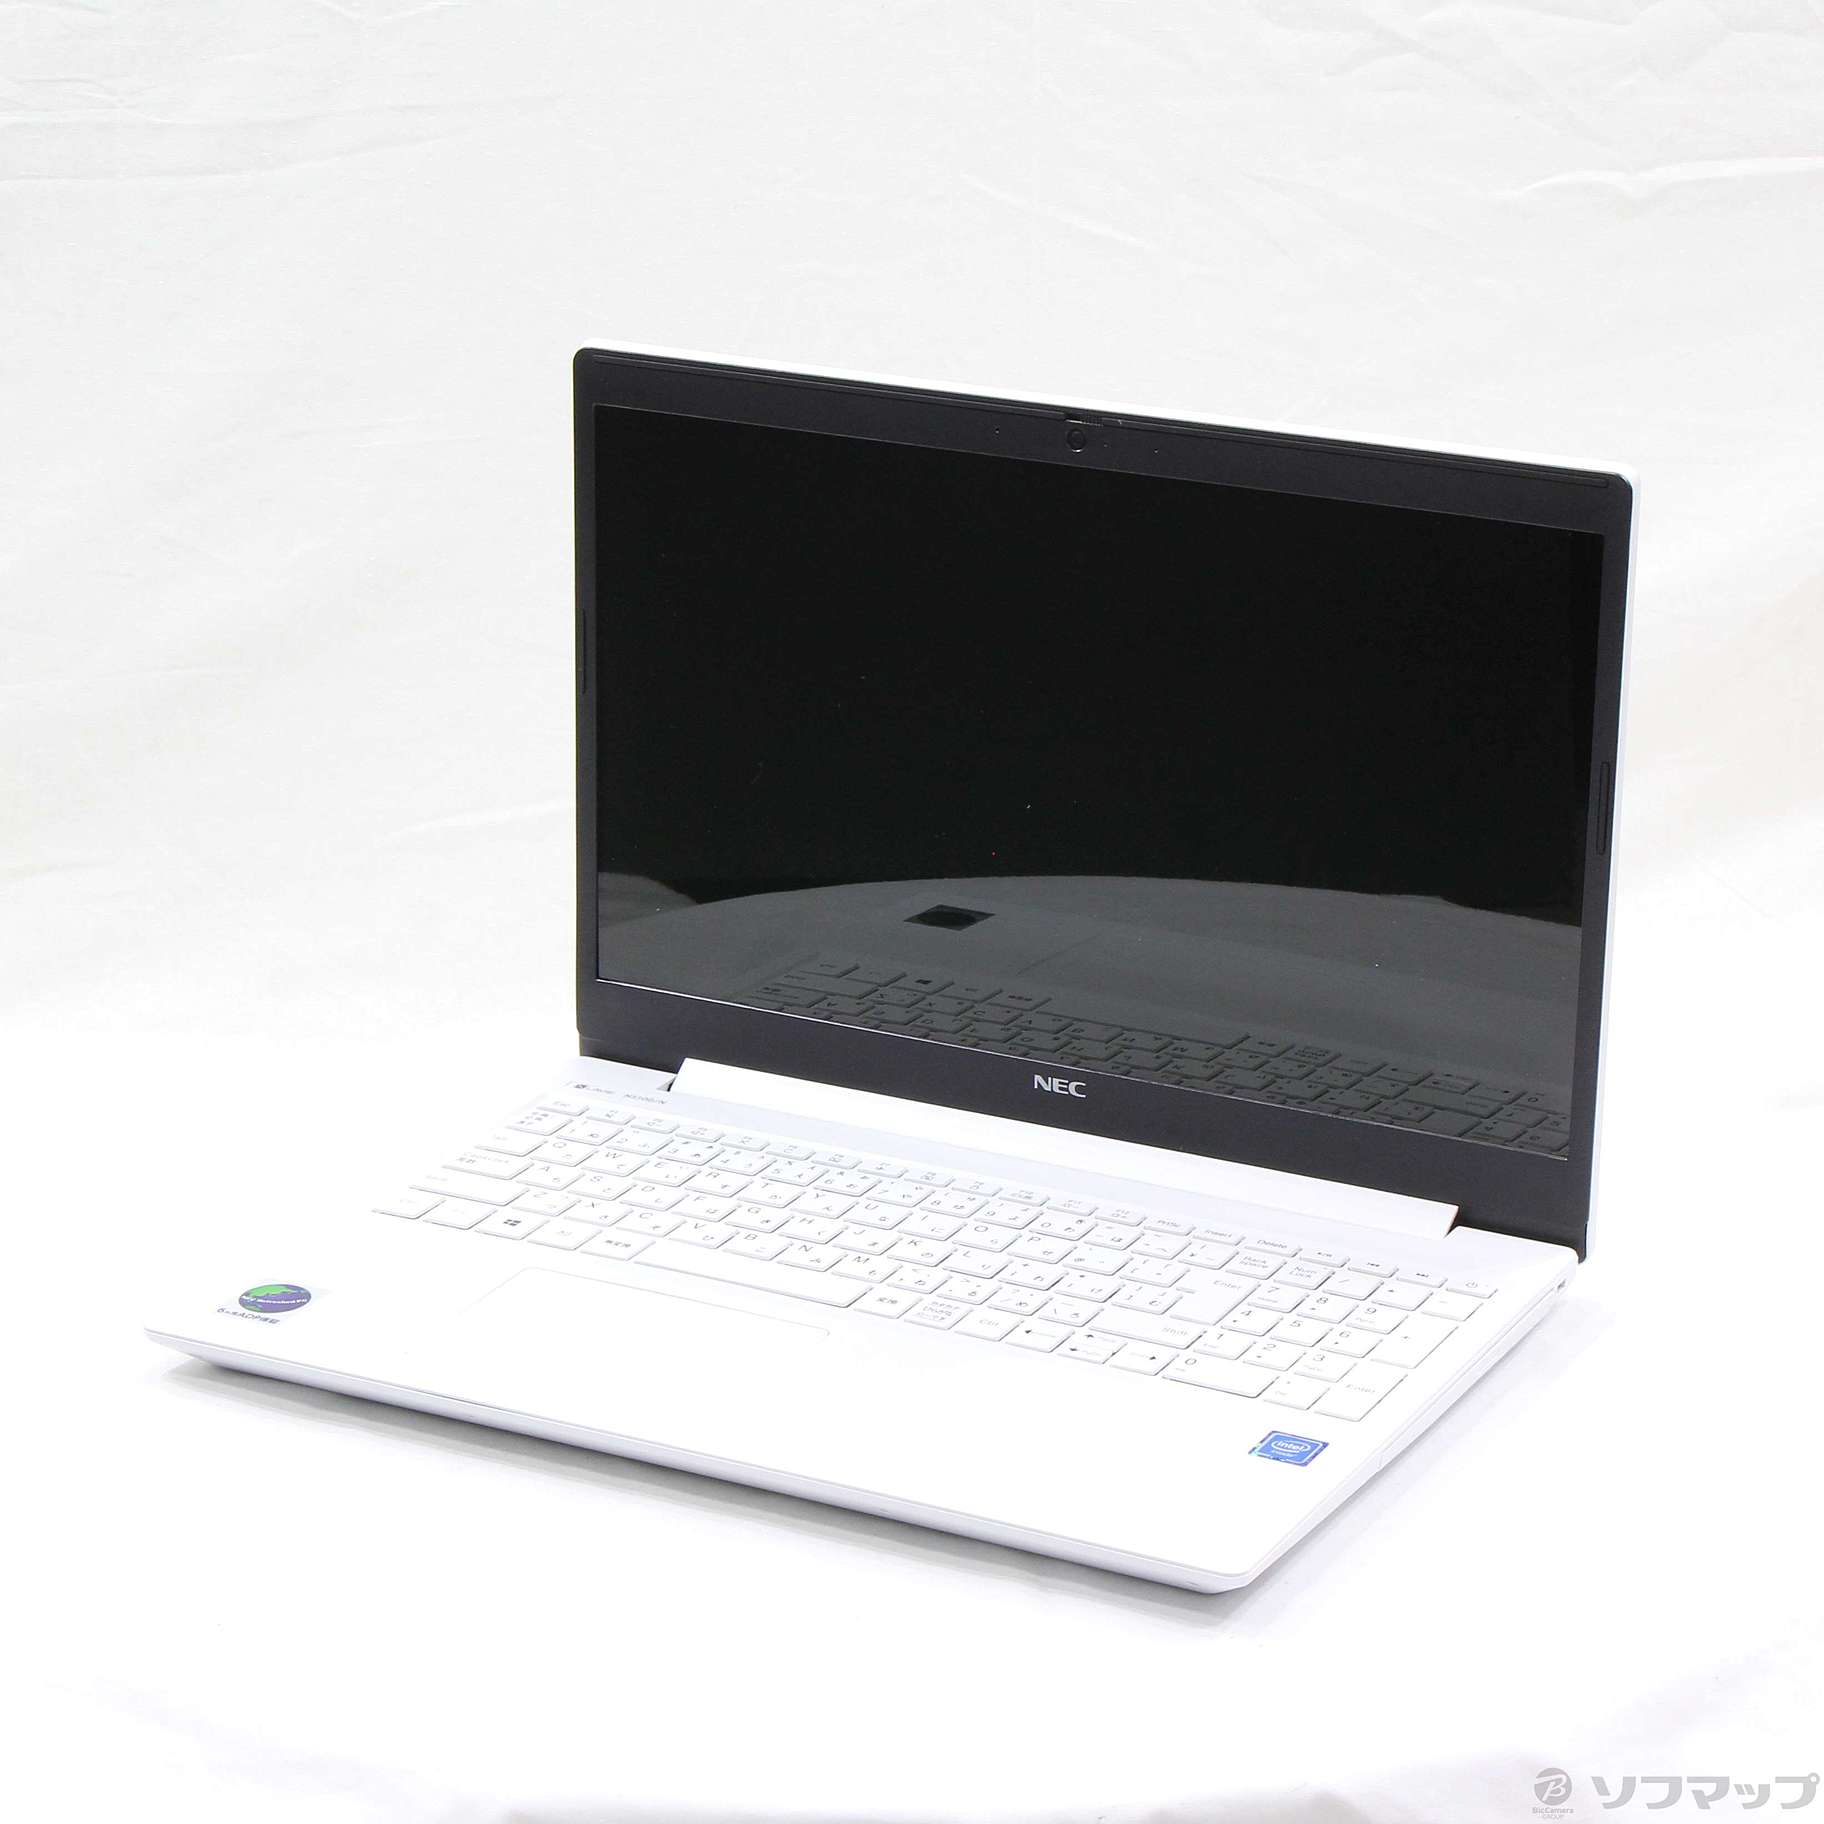 LaVie Note Standard PC-NS100N2W-H6 カームホワイト 〔NEC Refreshed PC〕 〔Windows 10〕  ≪メーカー保証あり≫